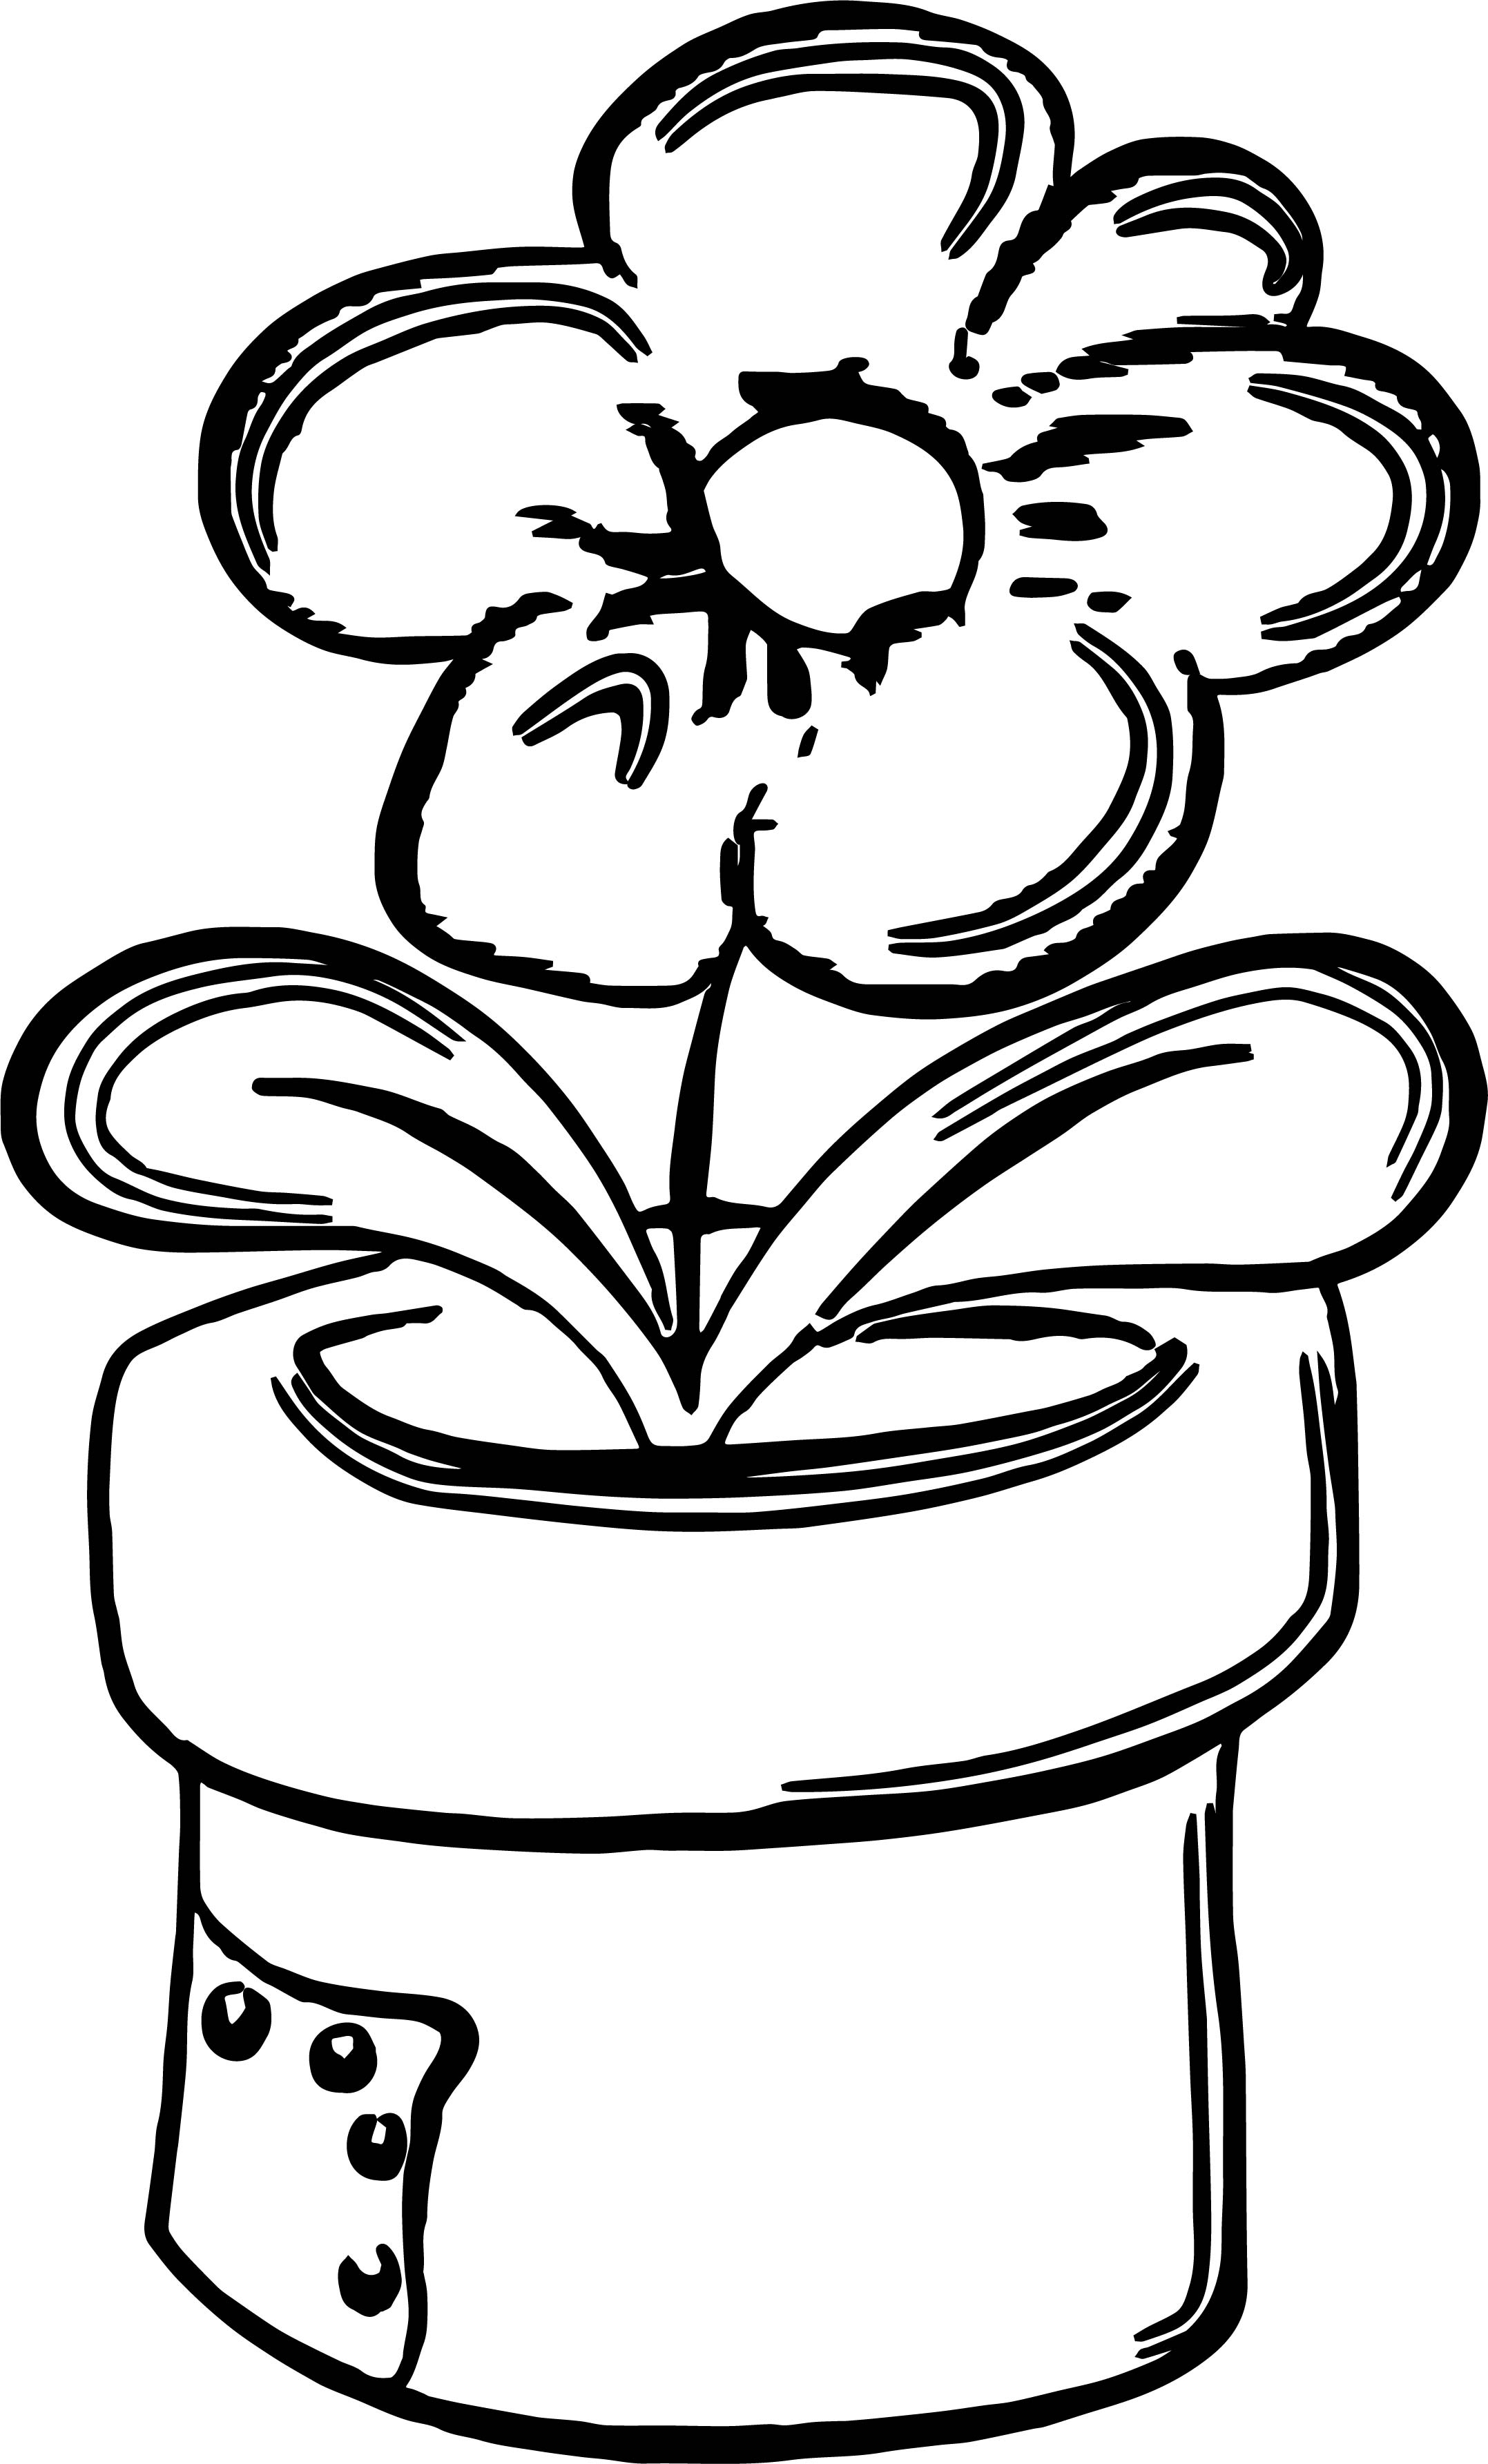 Spring Outdoor Flower Coloring Page | Wecoloringpage.com